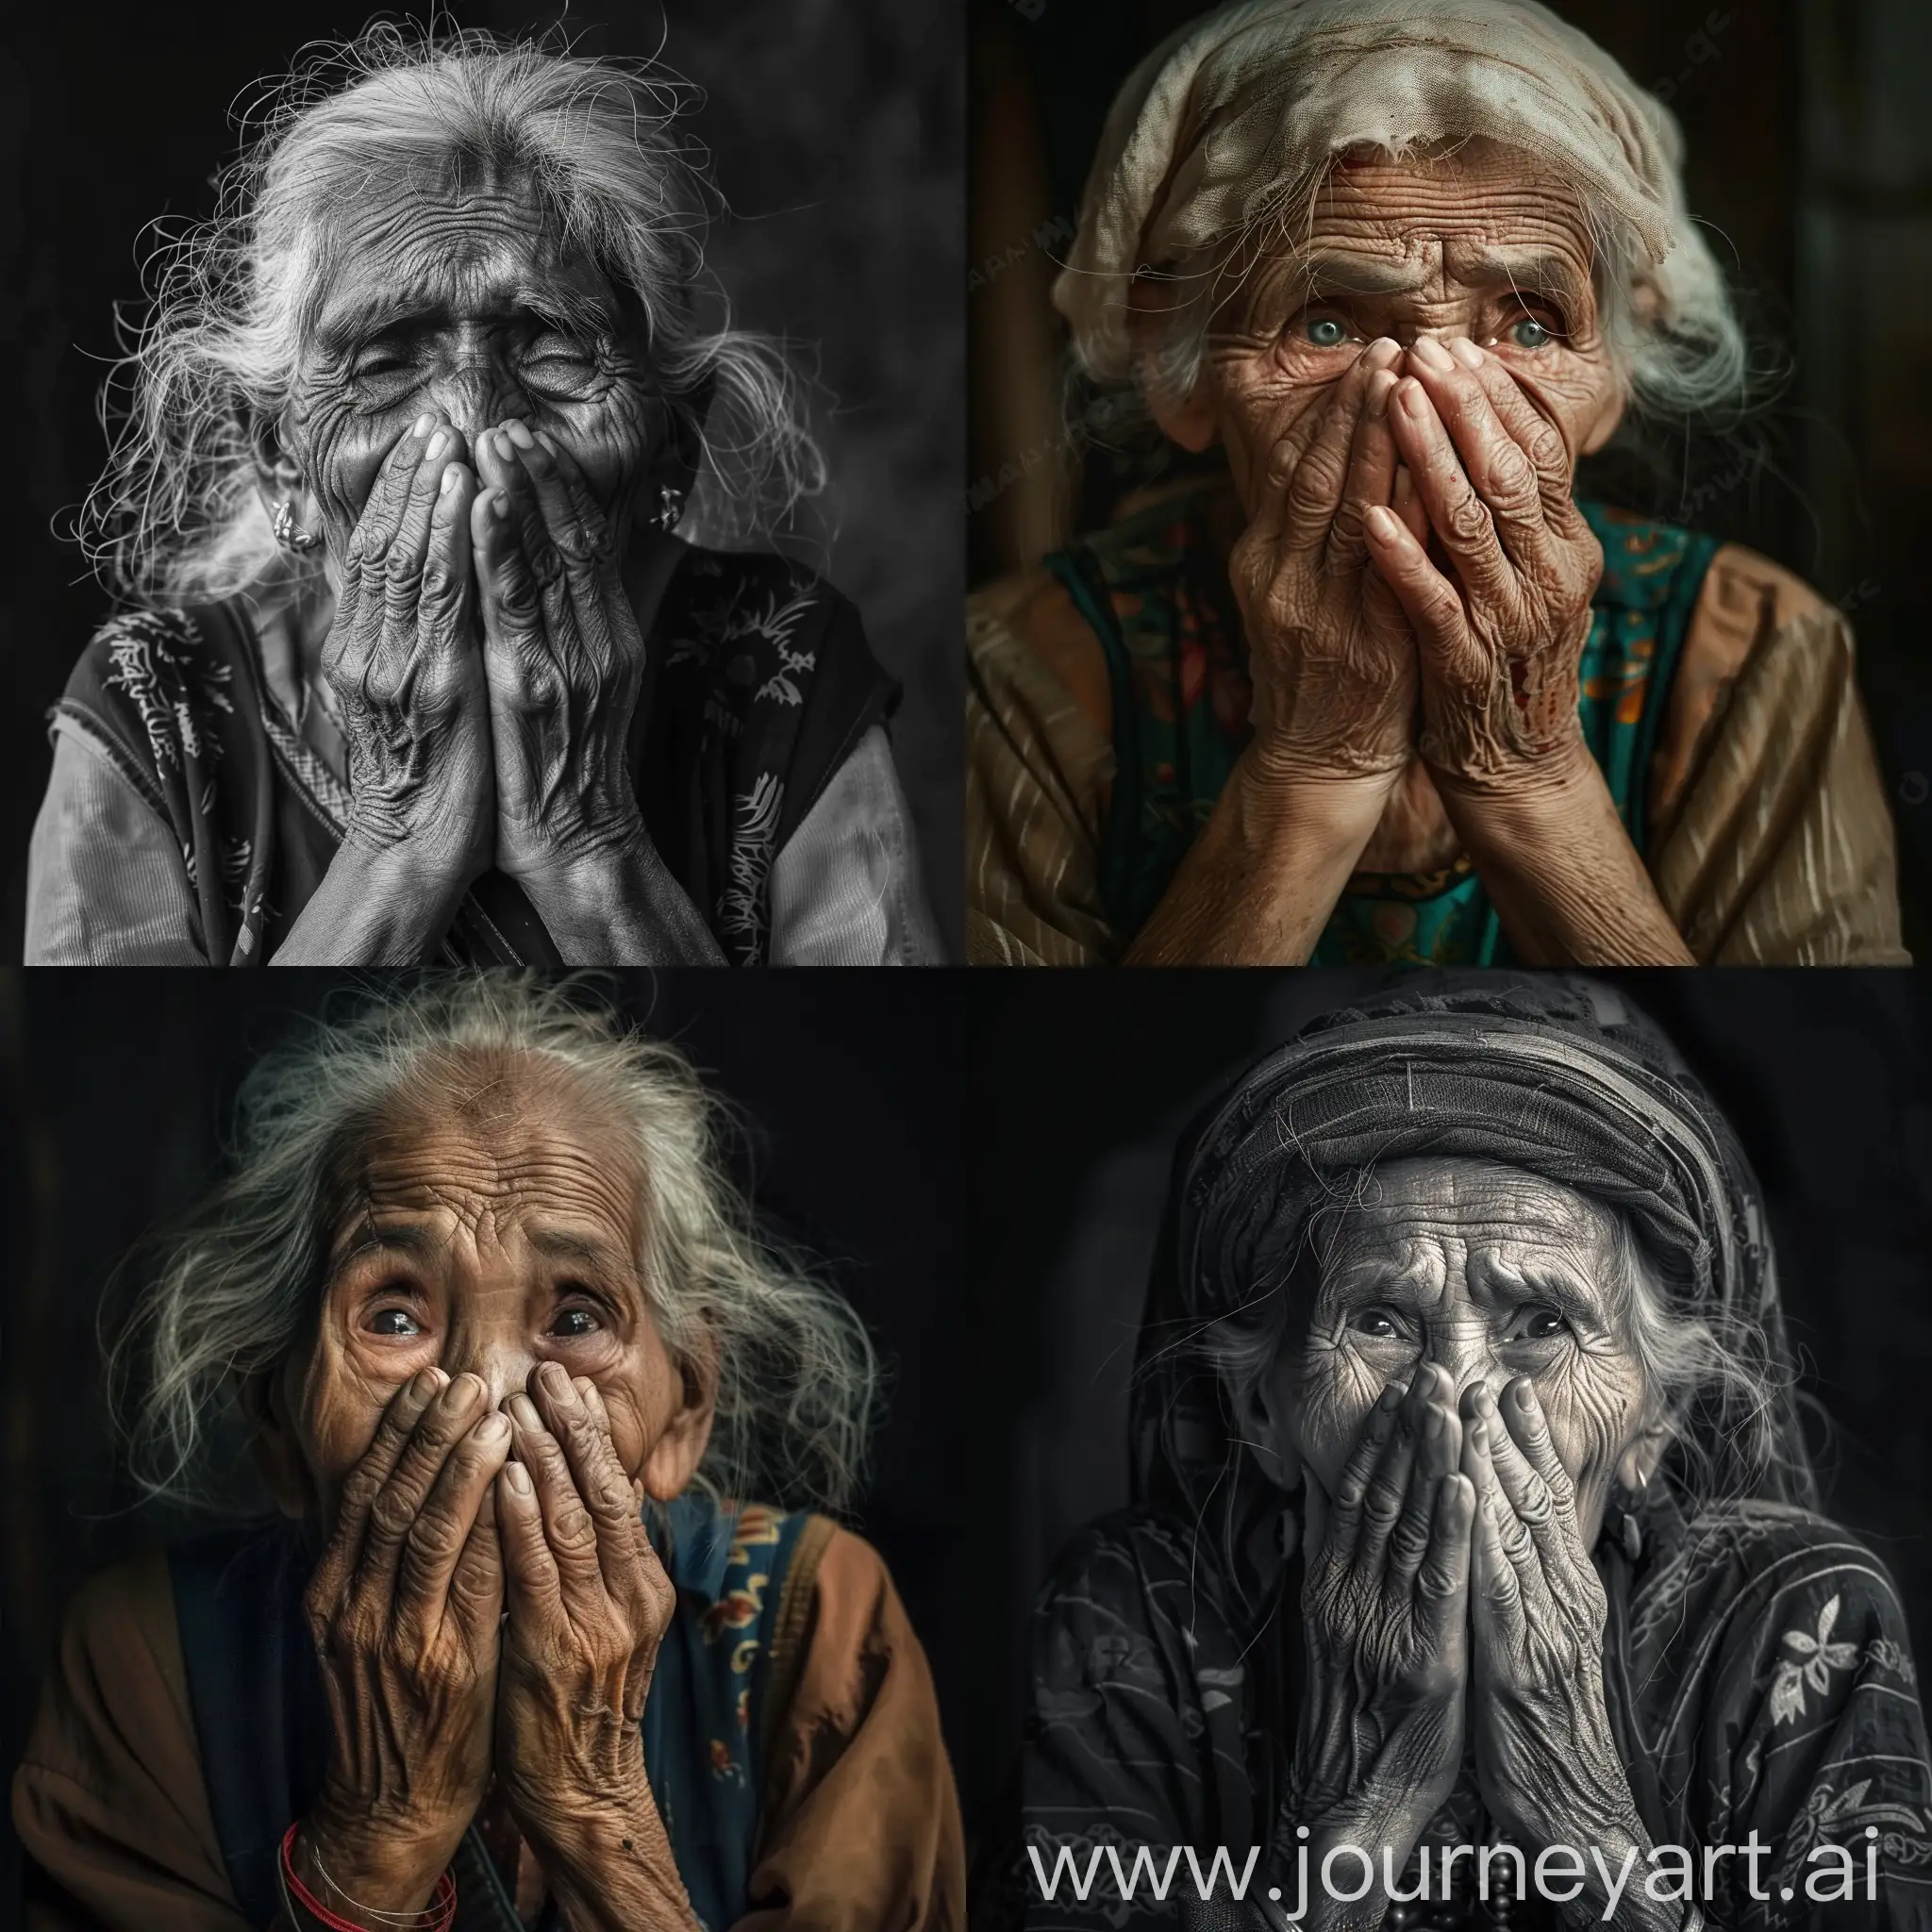 Elderly-Woman-Expressing-Joy-with-Hands-Covering-Mouth